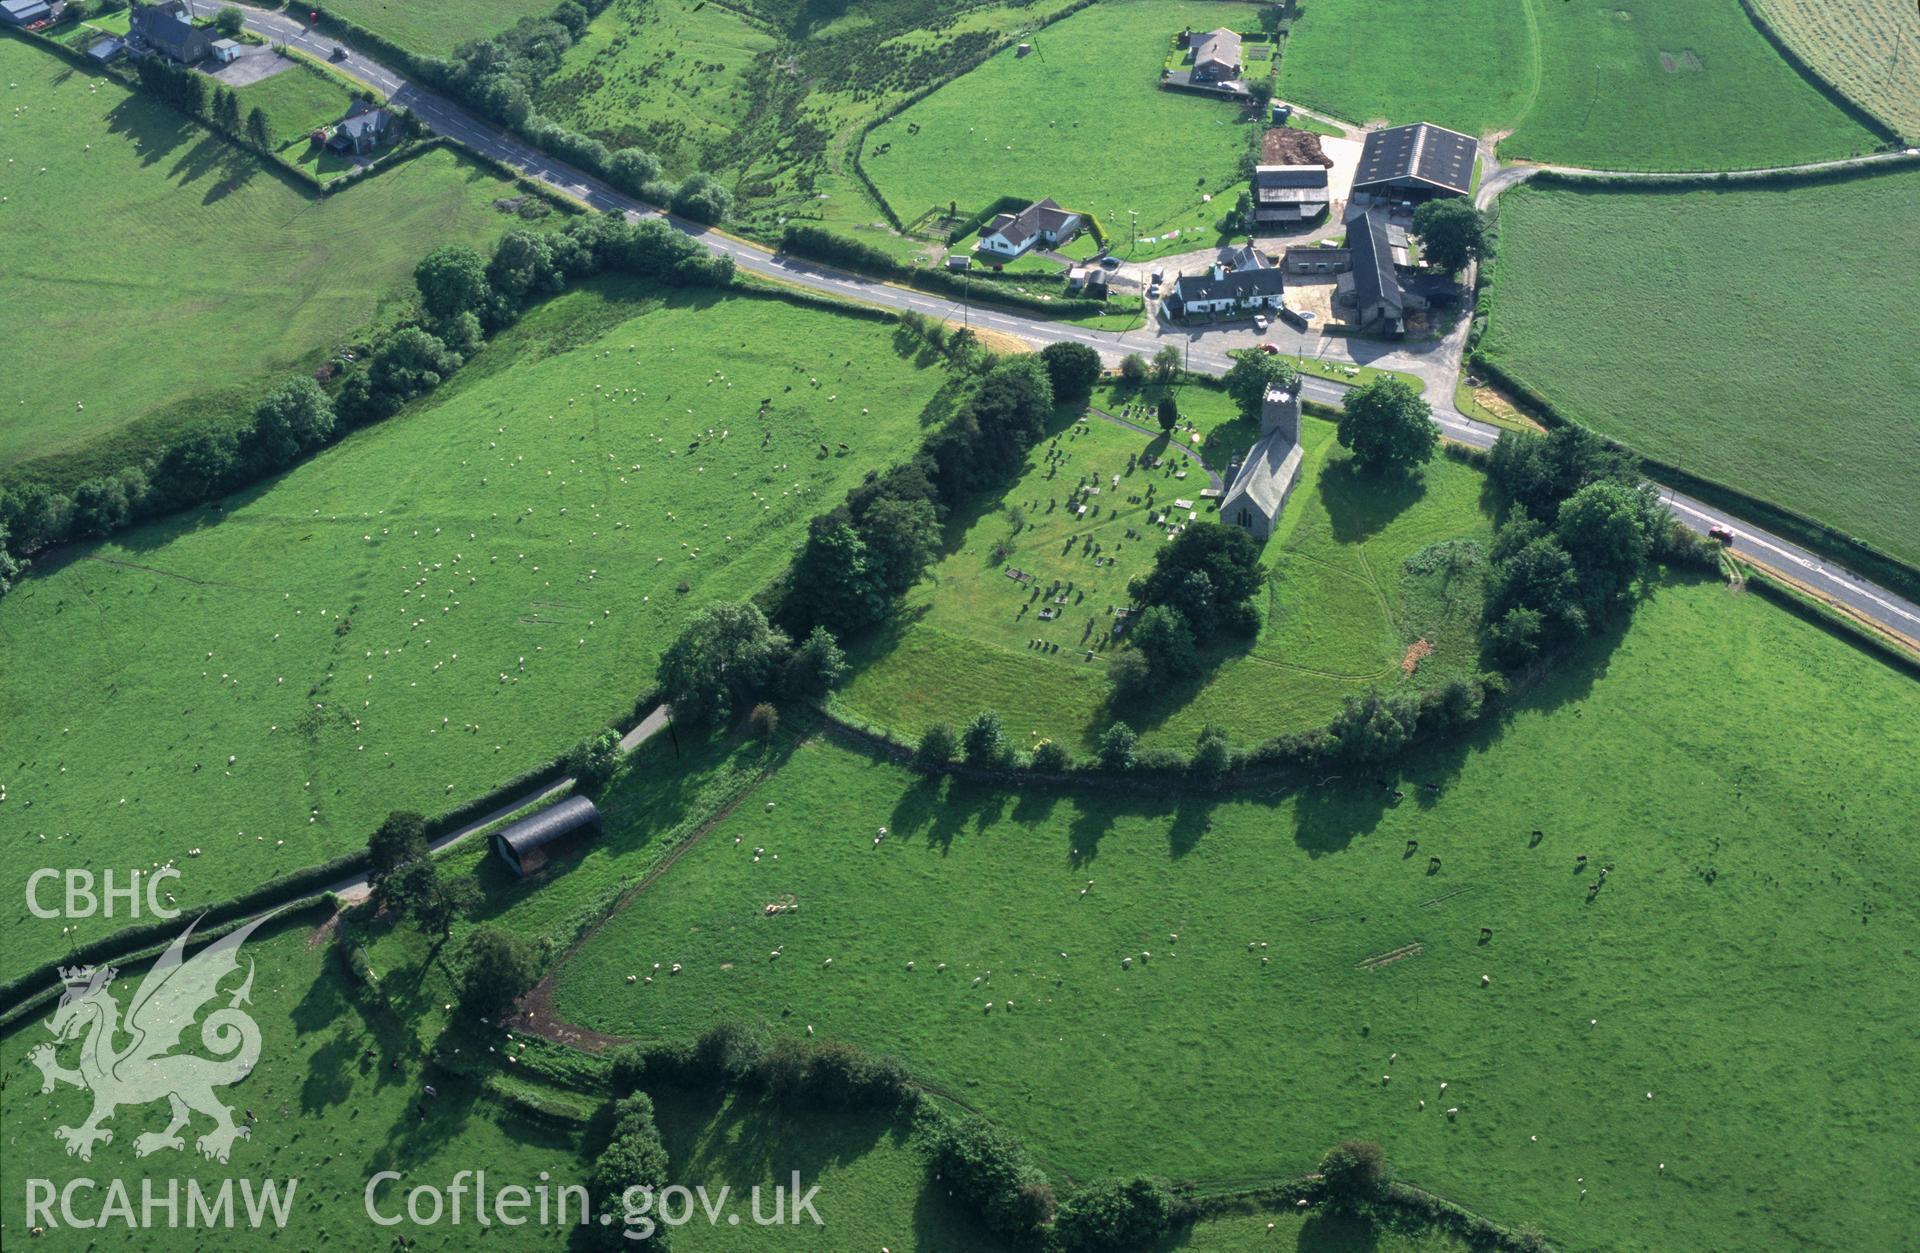 Slide of RCAHMW colour oblique aerial photograph of Llanafan Fawr, taken by T.G. Driver, 19/6/1998.